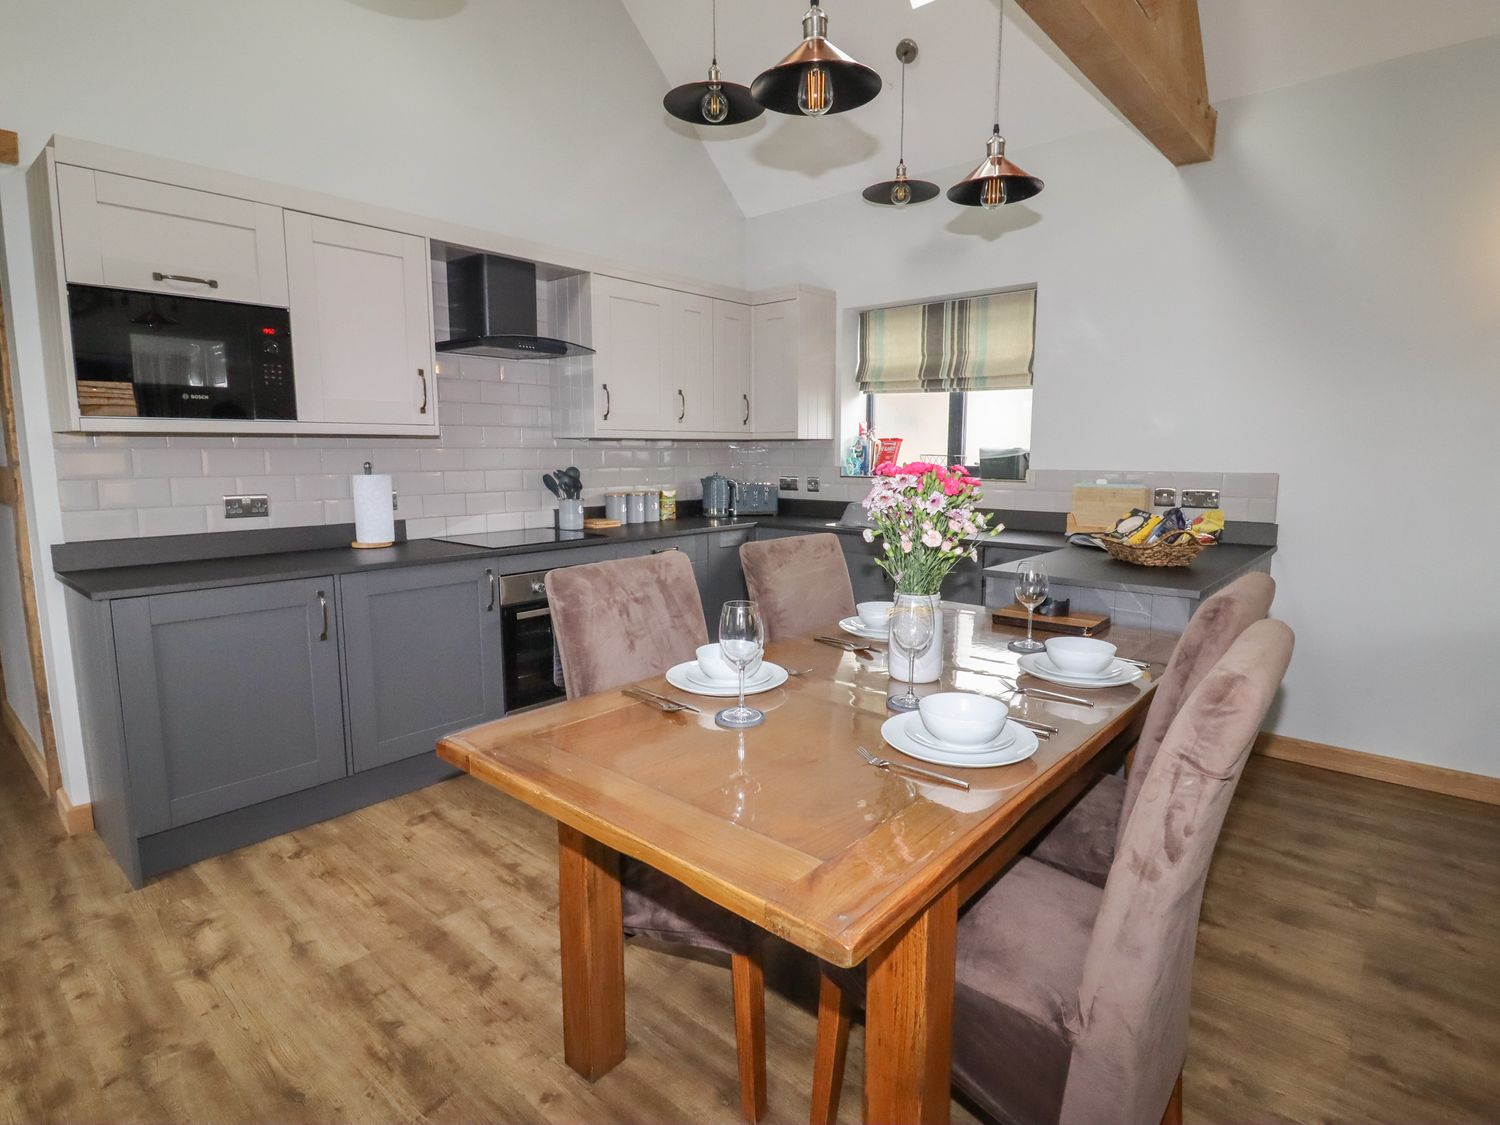 Forge Cottage is near Trefnant, Denbighshire. Two-bedroom barn conversion, resting rurally. Hot tub.